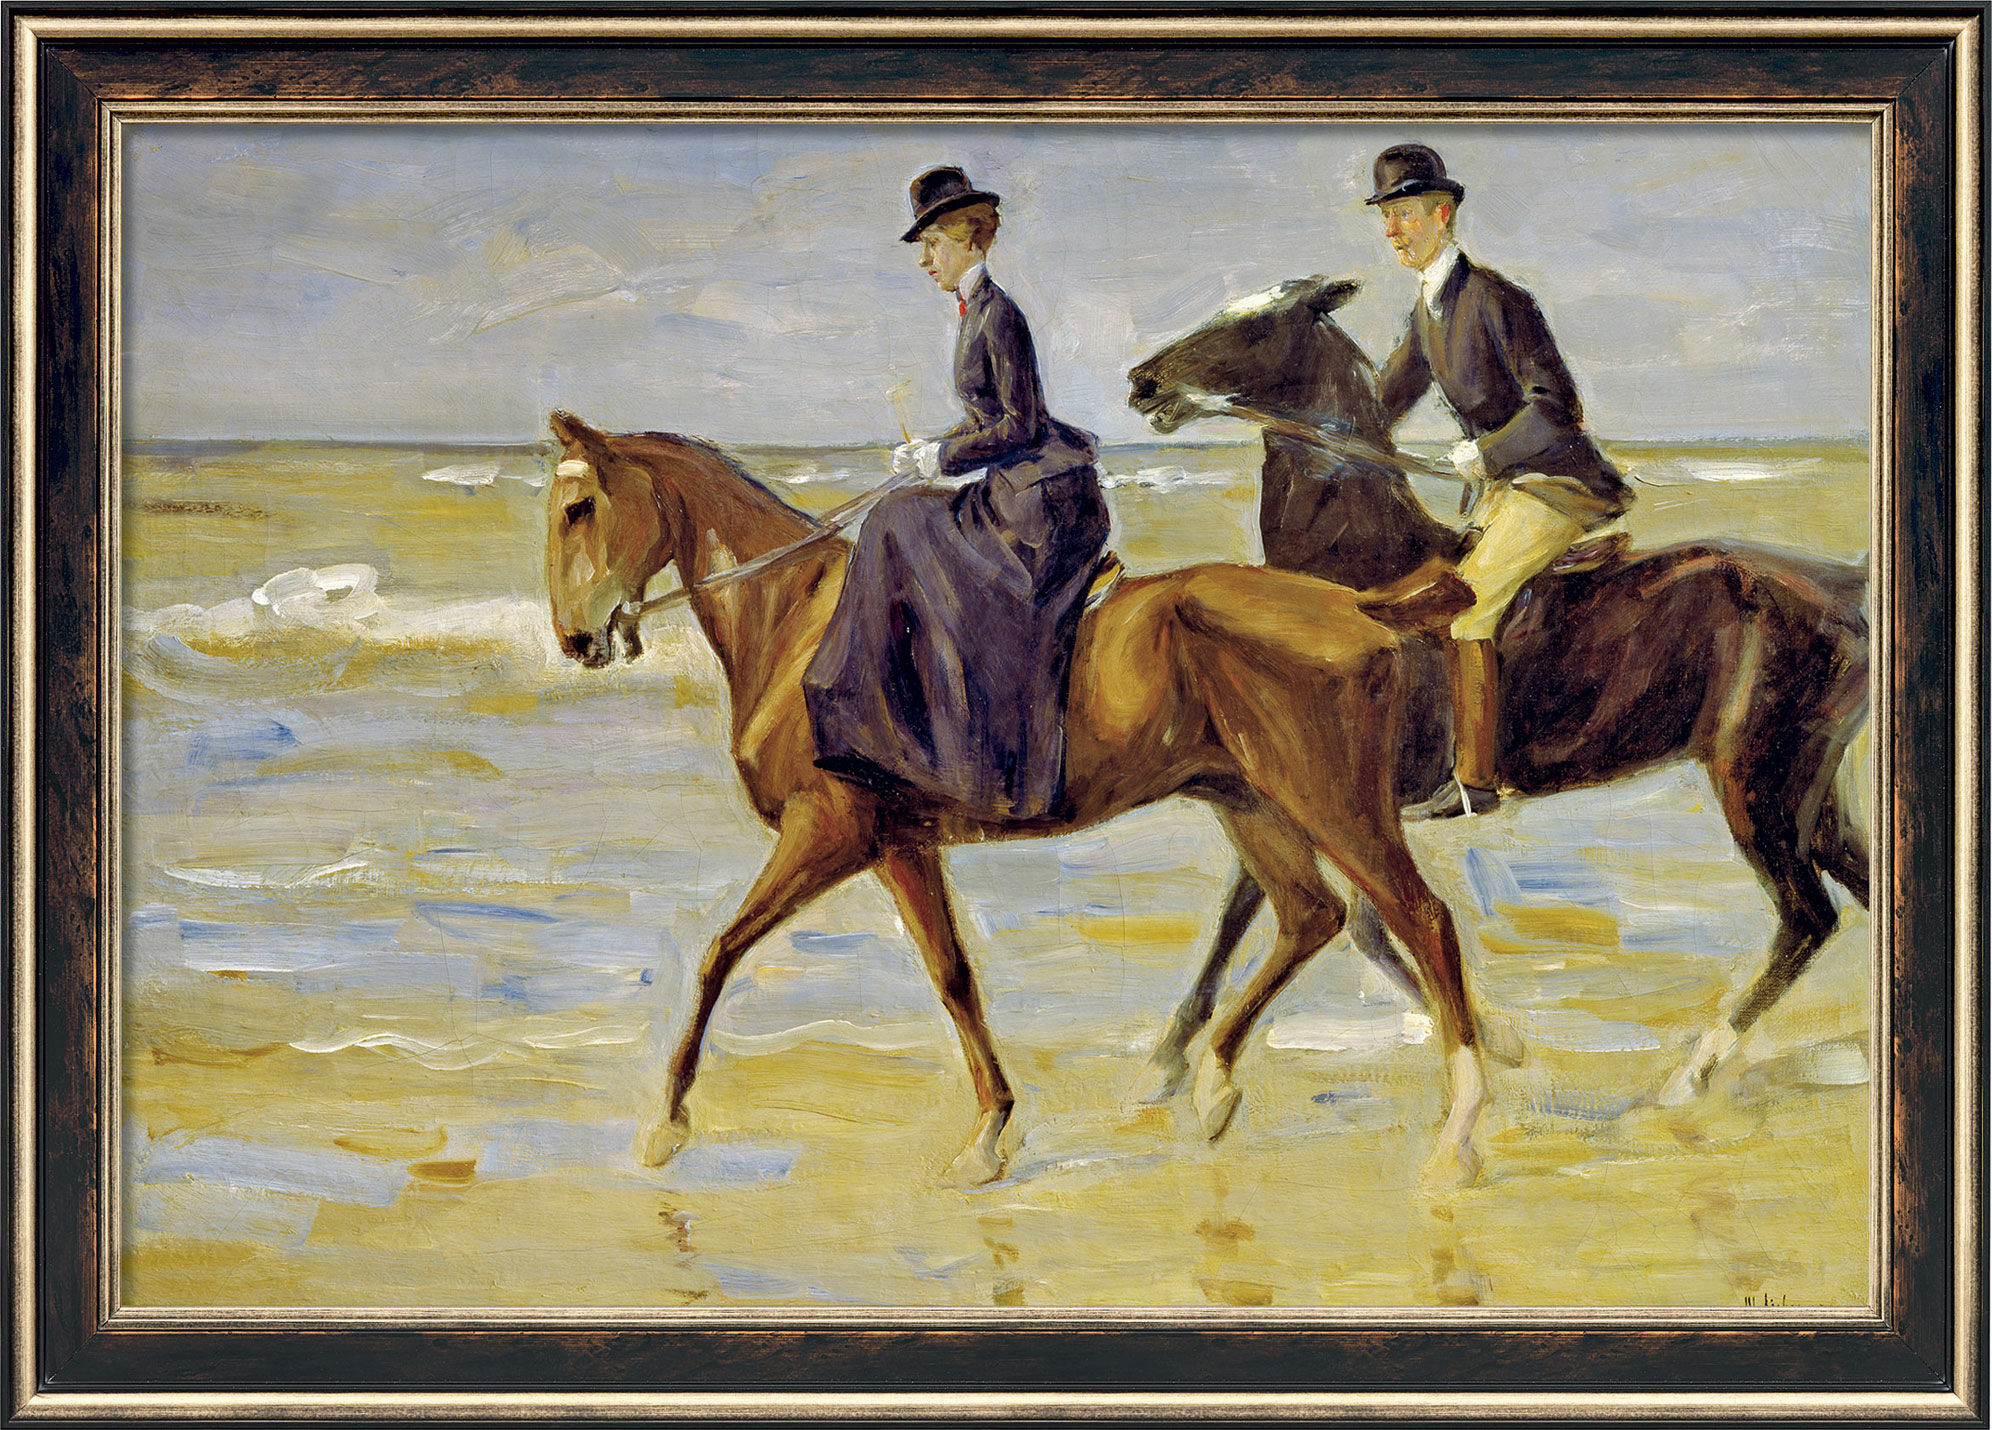 Picture "Two Riders on the Beach" (1903), framed by Max Liebermann